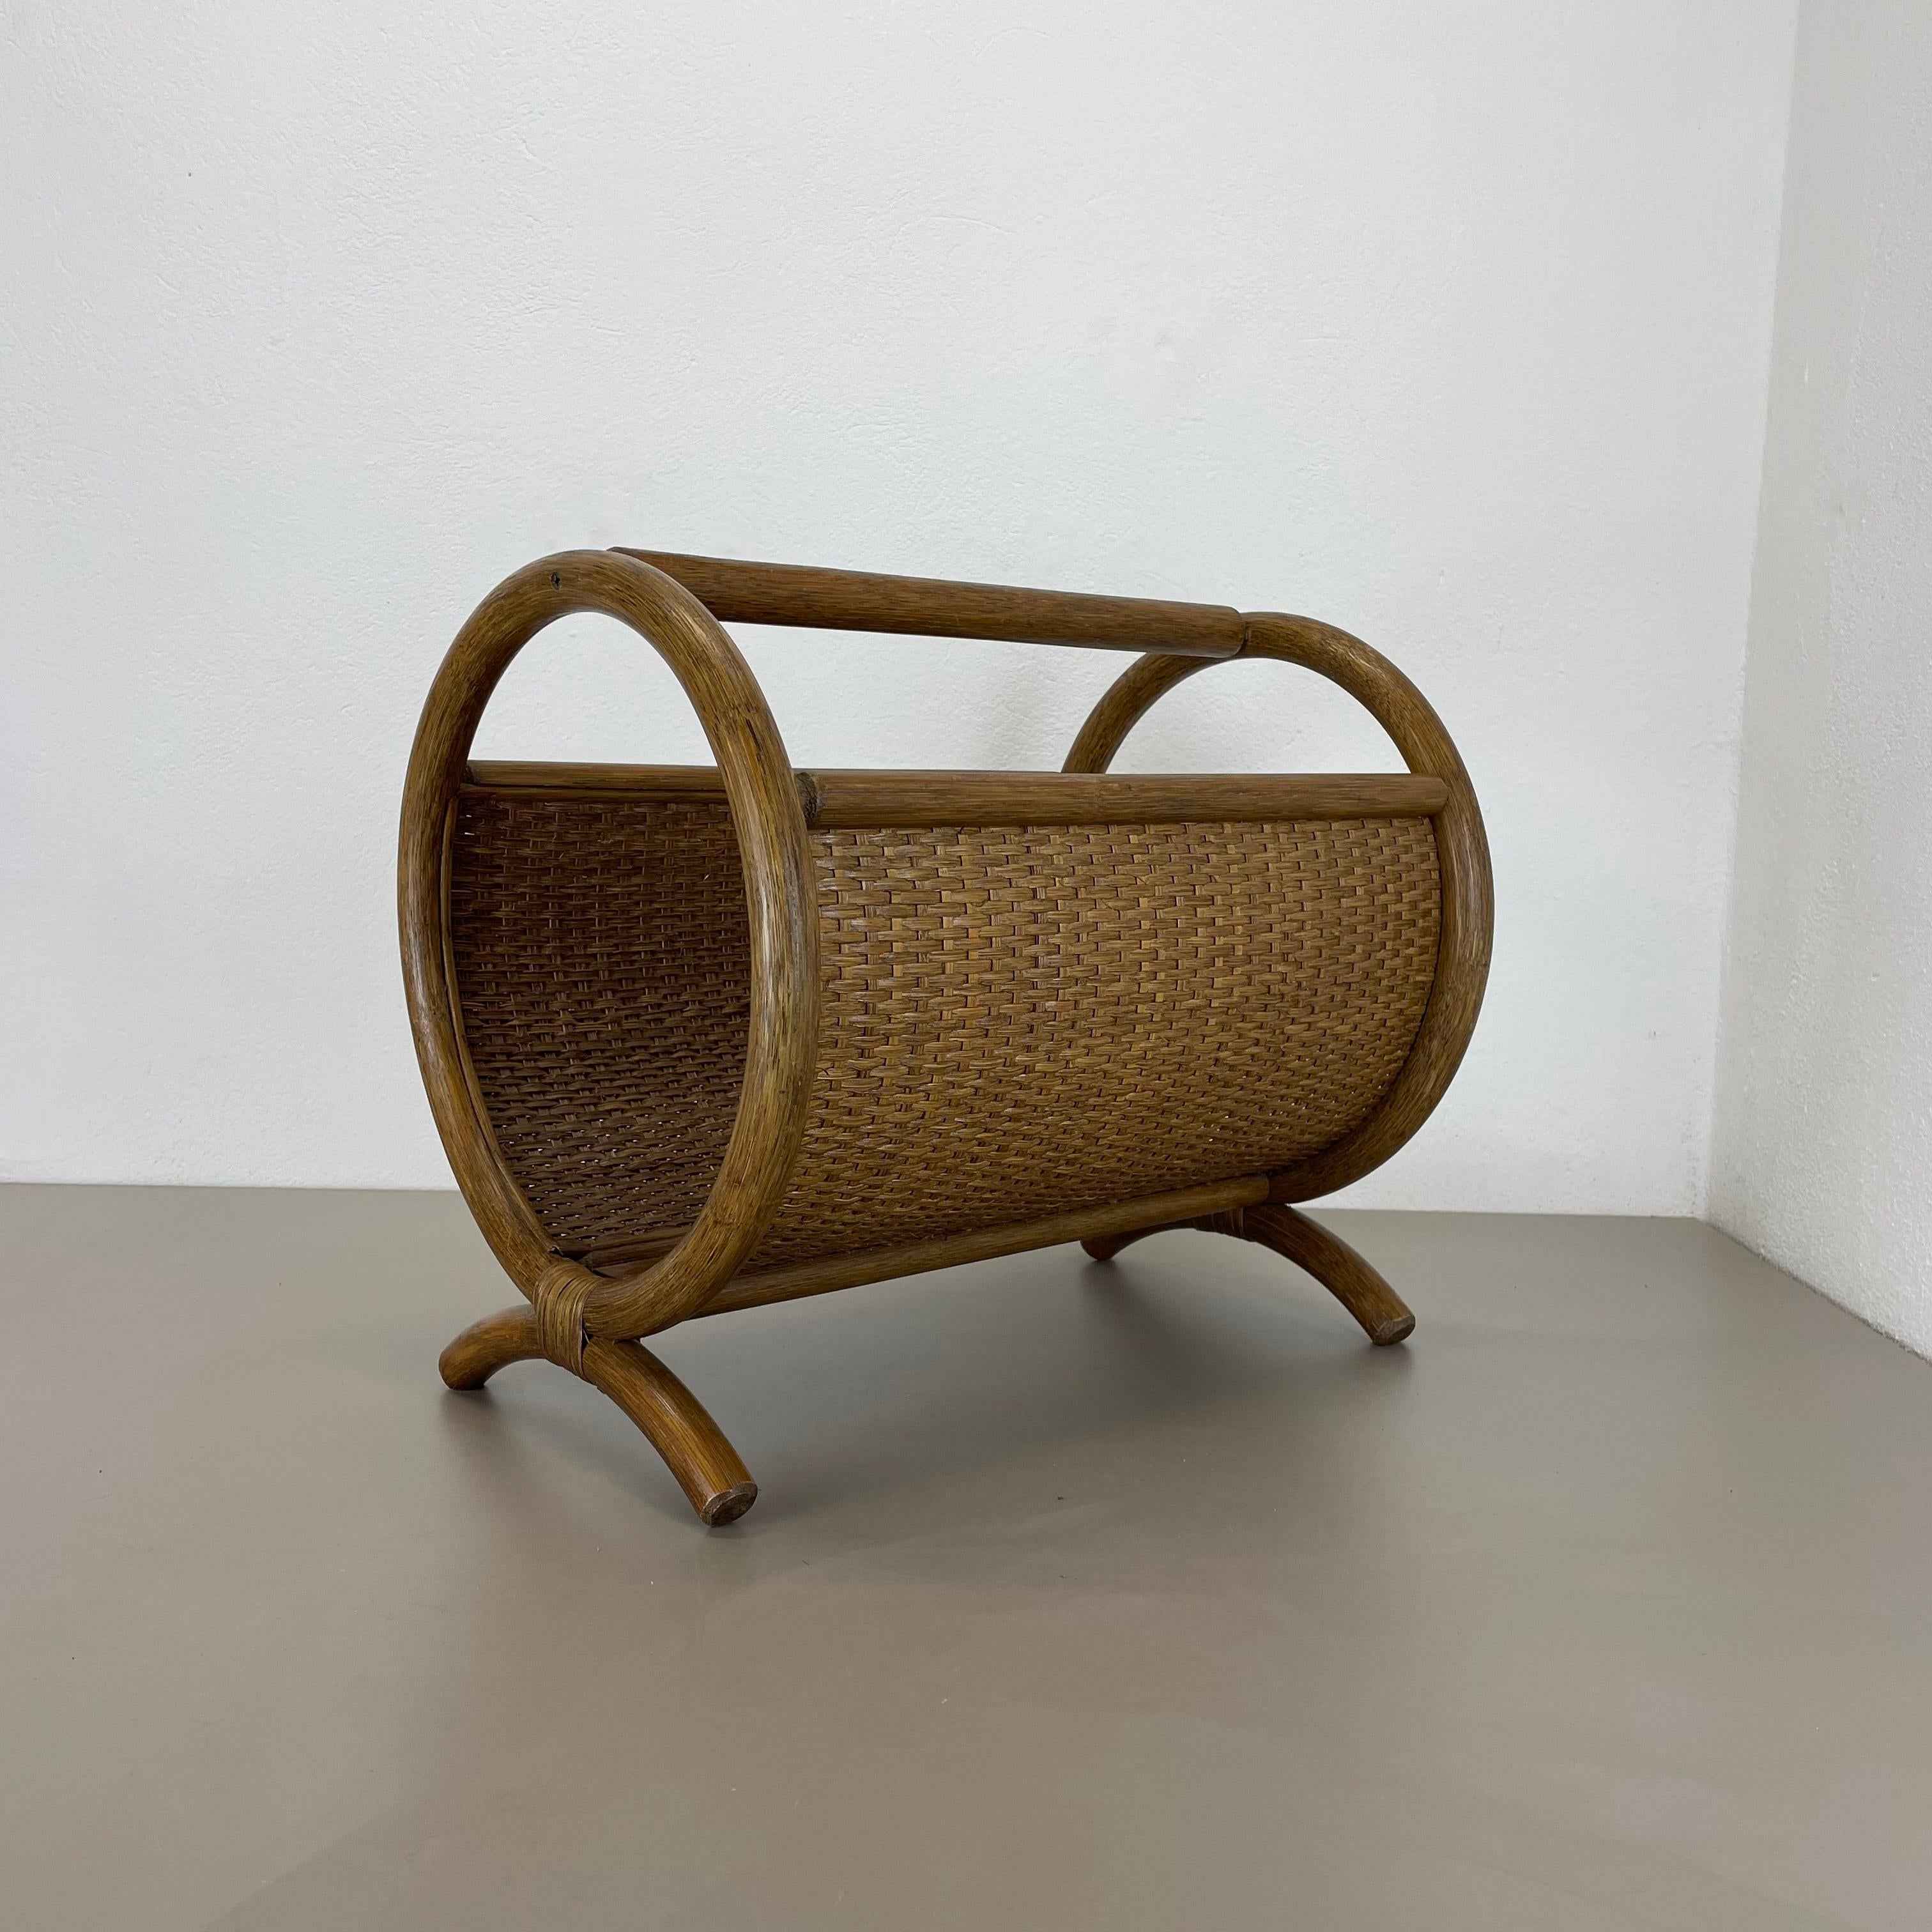 Article: magazine holder stand element
Origin: France
Age: 1980s.
This original vintage Bauhaus style magazine holder stand was produced in the 1980s in France. It is made of natural wood rattan in a round formed shape and at the top a handle